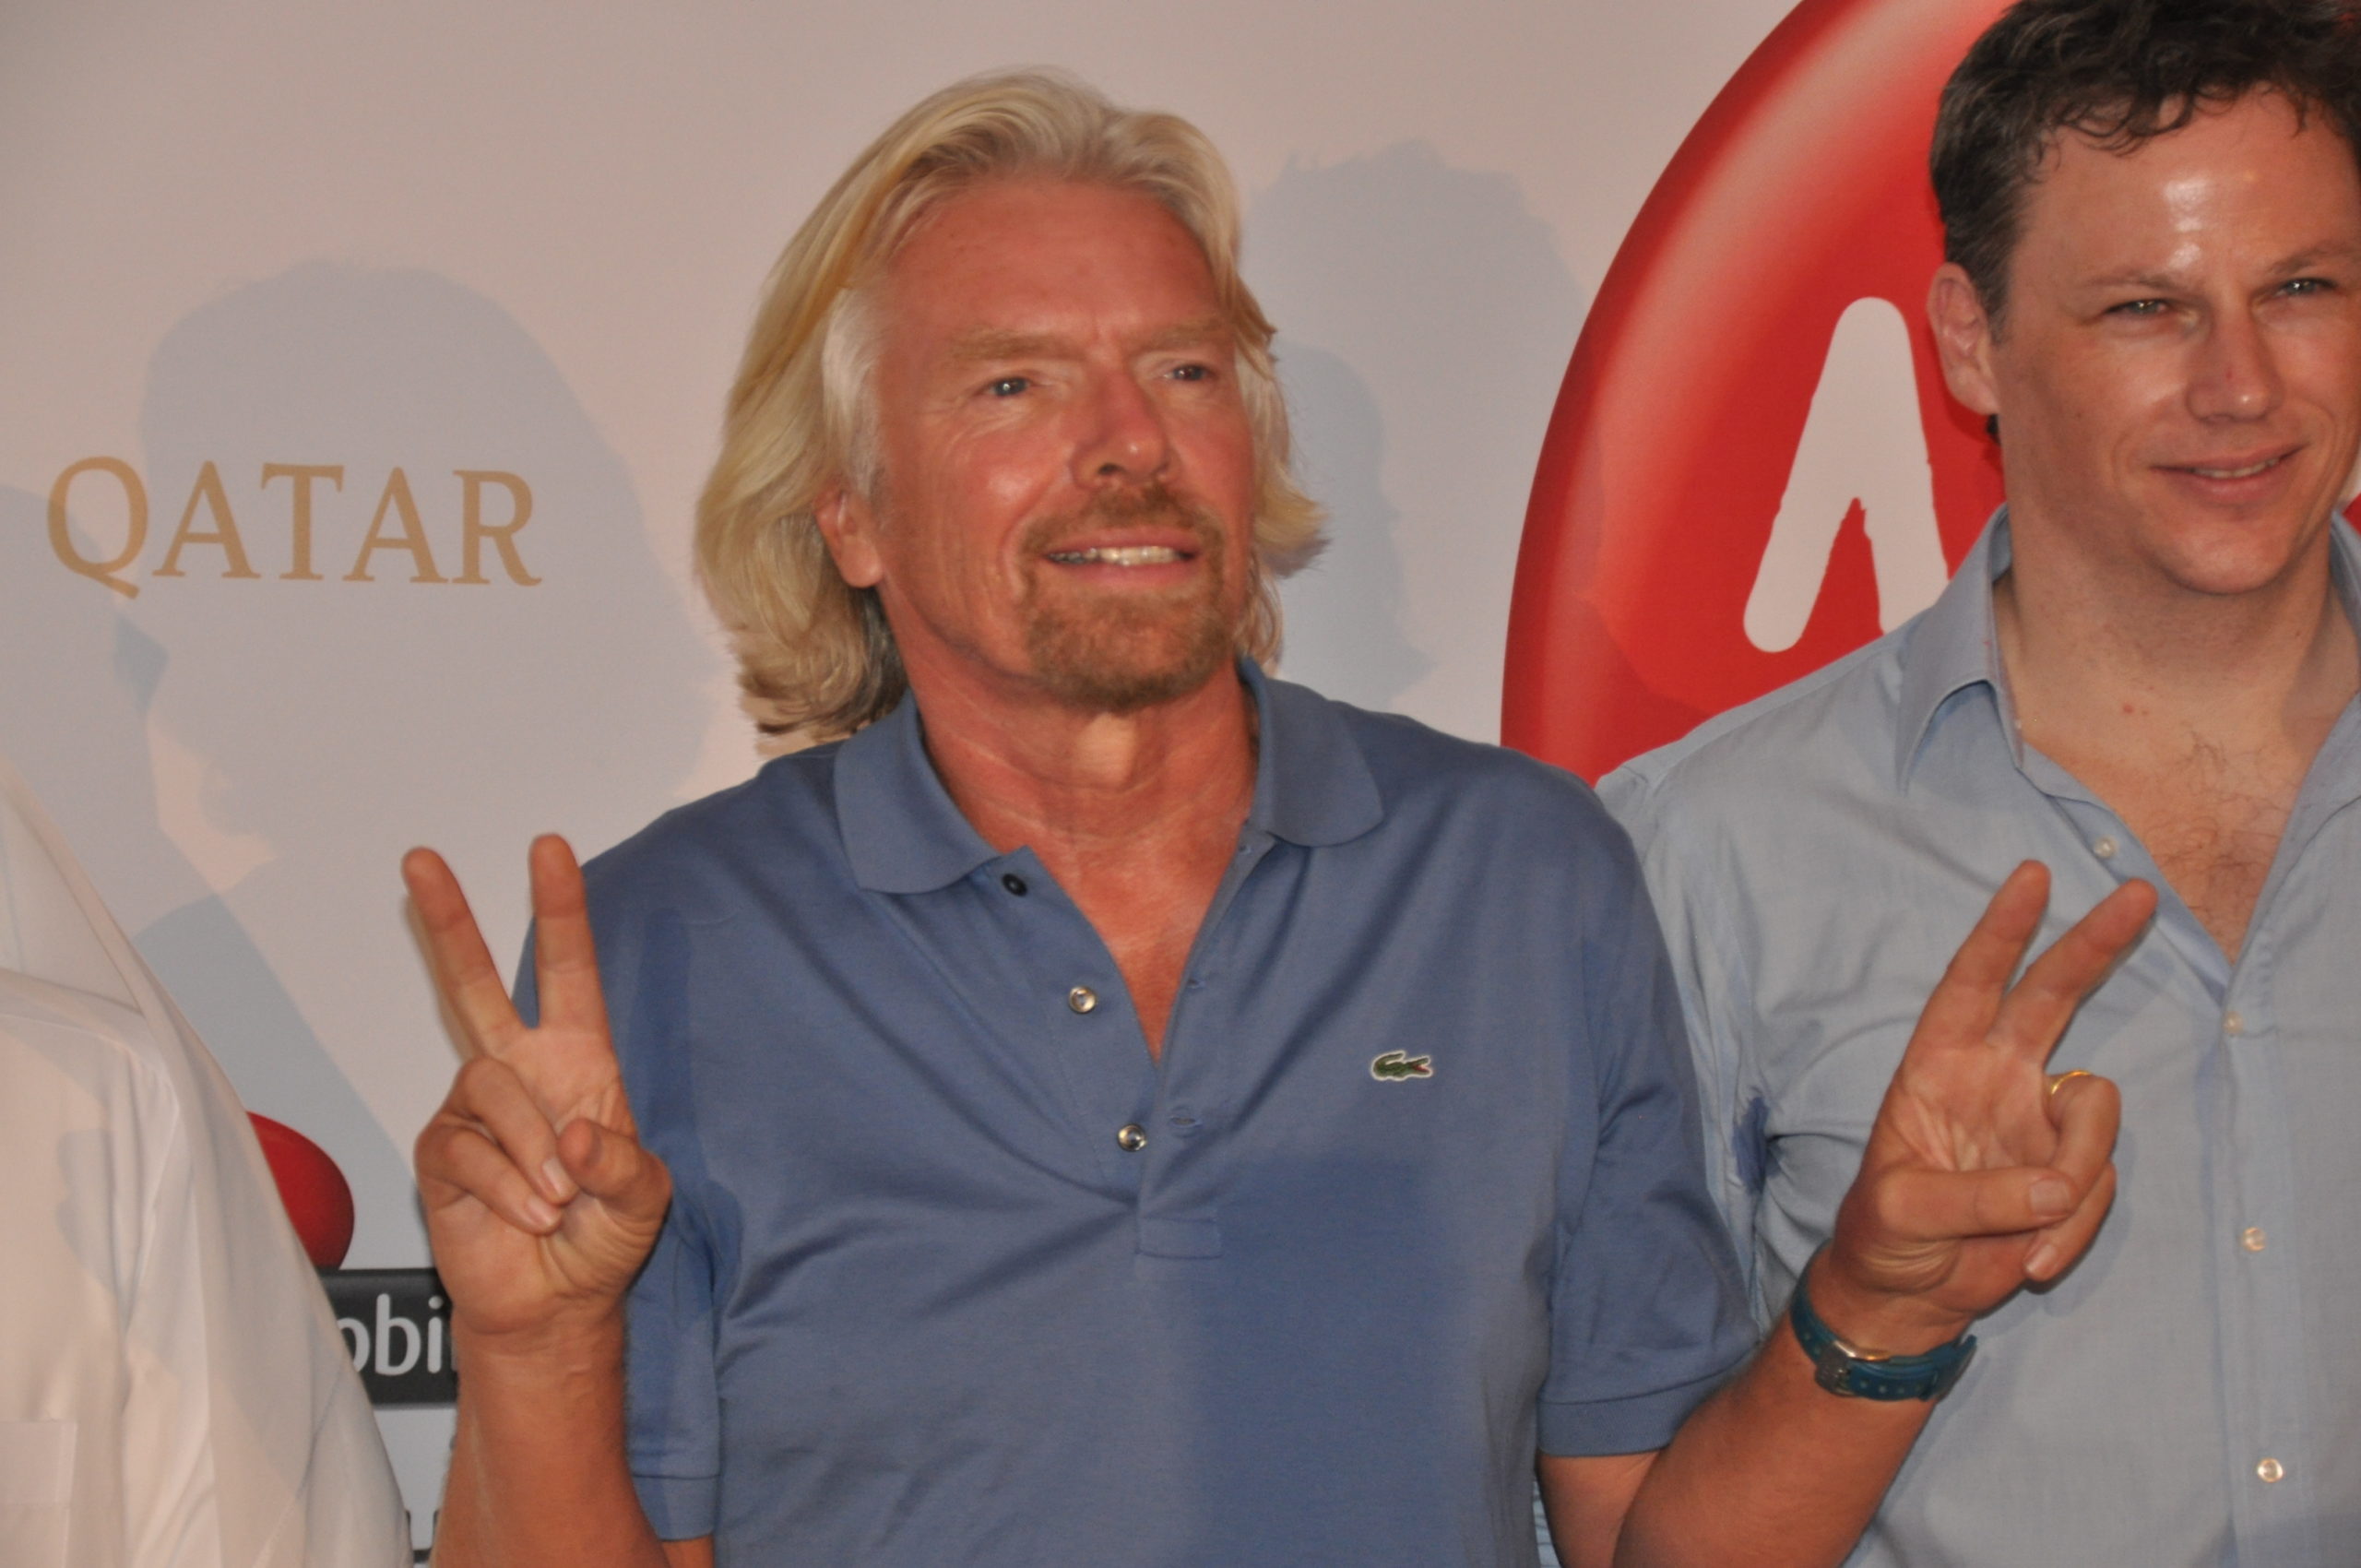 Richard Branson is standing in front of a wall with the Qatar Airways and Virgin Moblie logos on it. Two unknown people stand on either side of Branson. Branson is making V-signs with both his hands.